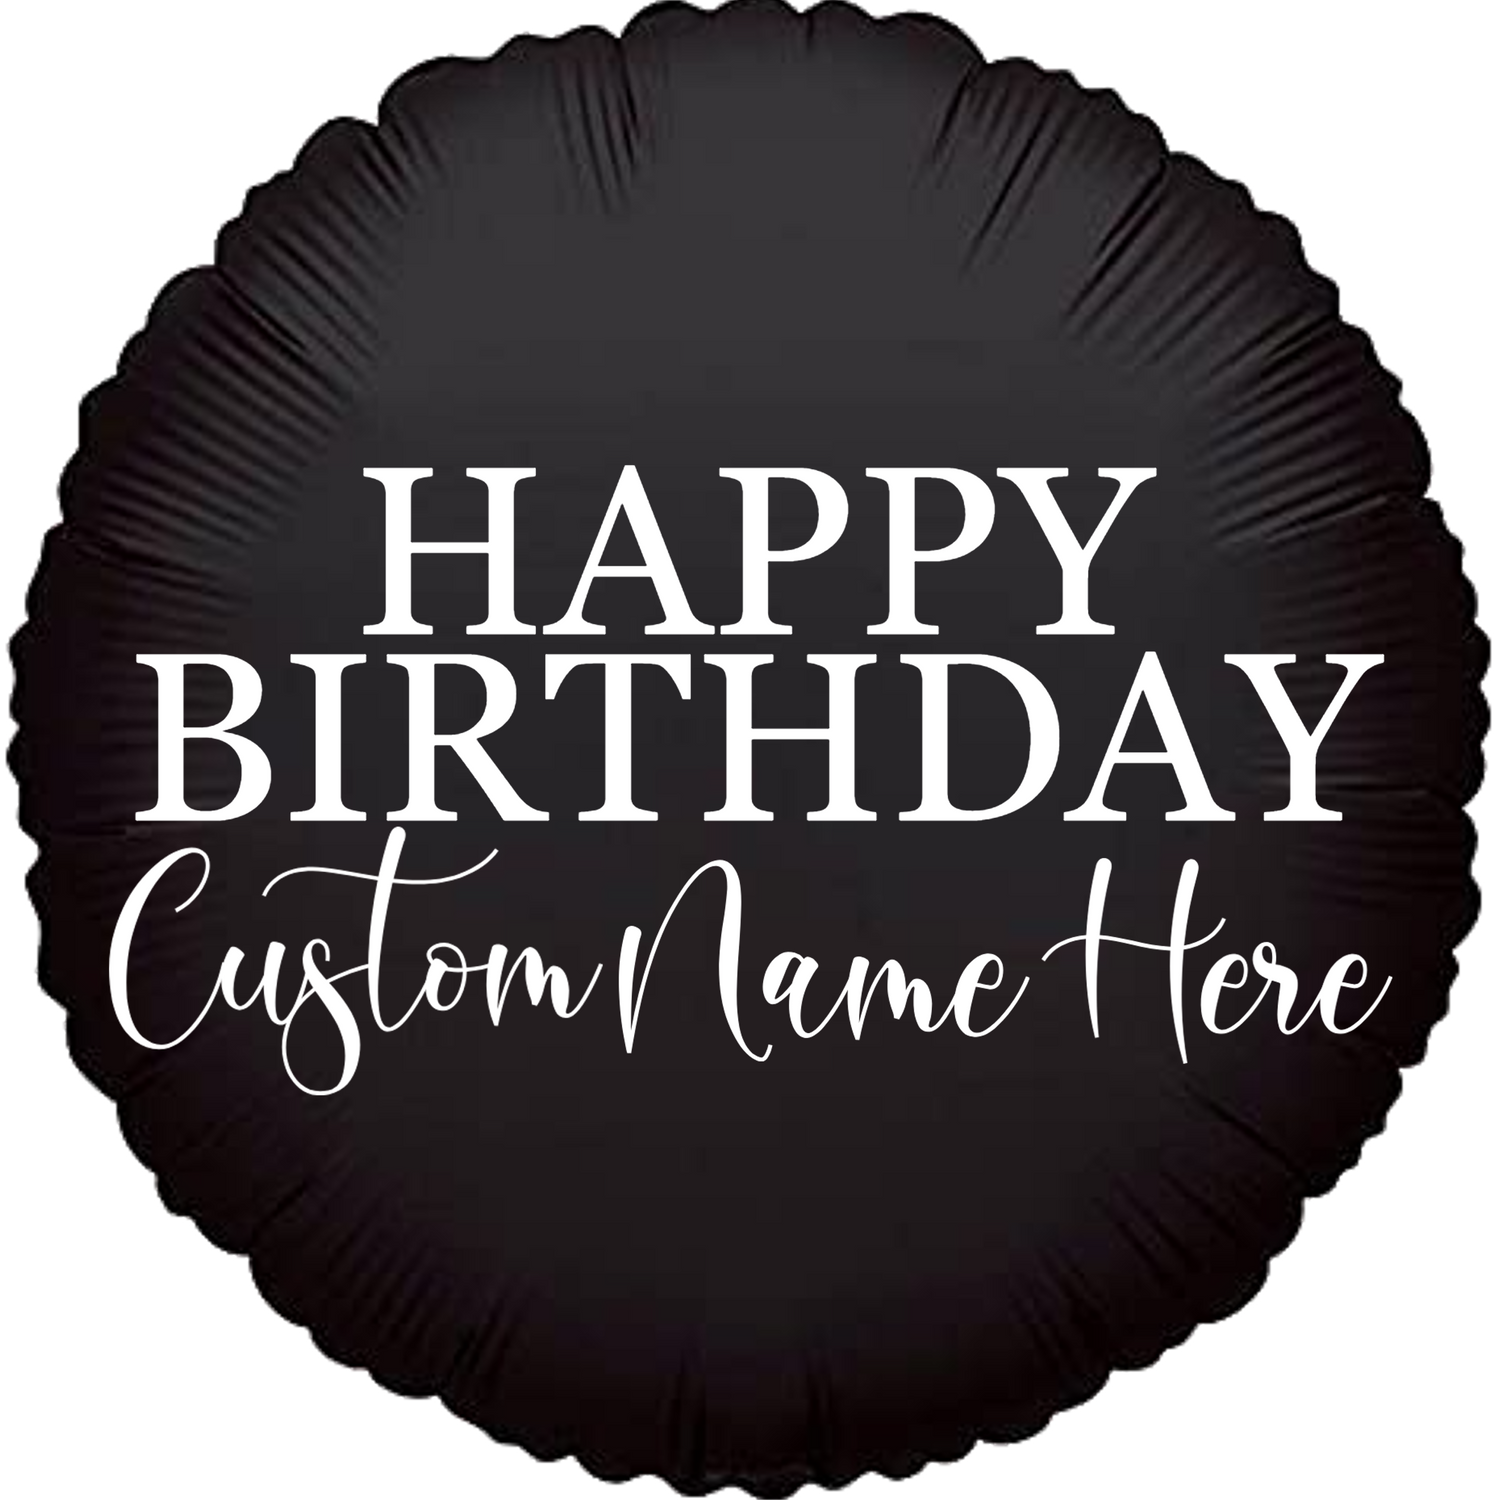 Personalized/Customized Custom Name/Text Black Round Foil/Mylar Balloons For Six Months/First/Second/Third/Sixteenth/Twenty-First/Thirty/Forty/Fifty/Sixty/Seventieth Birthday, Milestone Birthday or a Special Themed Birthday Event. Supports Helium/Air, Luxury Bespoke Balloons Are a Perfect Surprise For Your Baby, Wife, Mom, Dad, Brother, Sister, Friends & Loved Ones